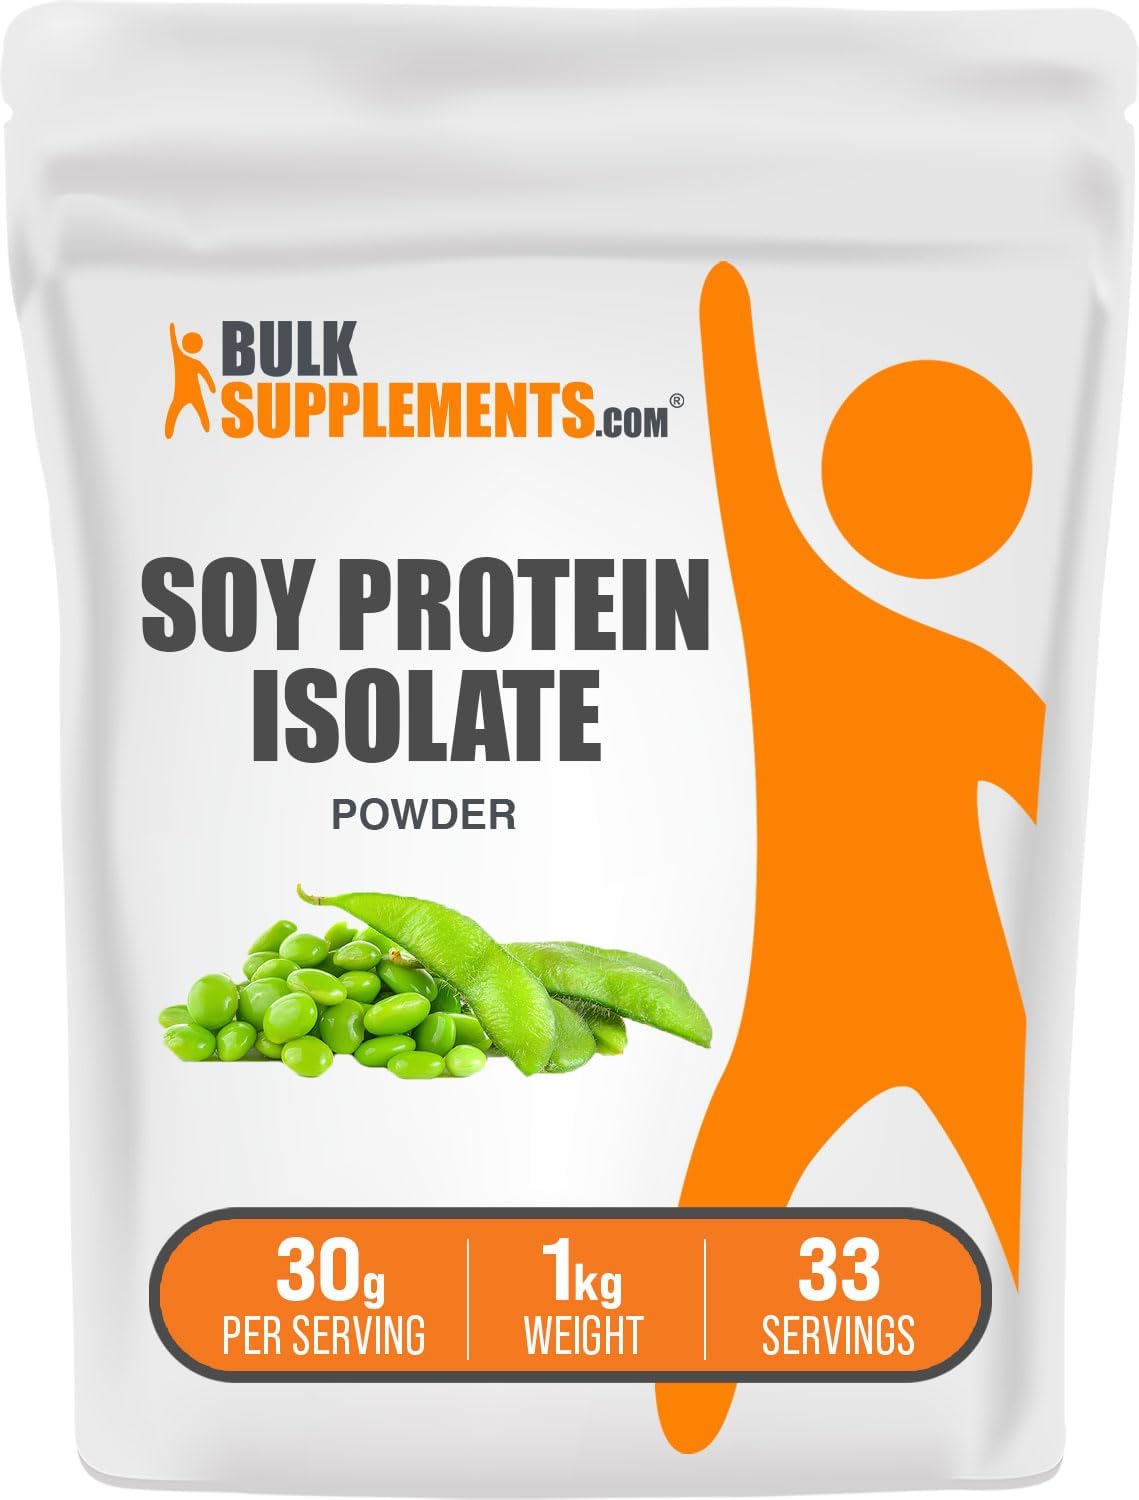 BULKSUPPLEMENTS.COM Soy Protein Isolate Powder - Unflavored, No Sugar